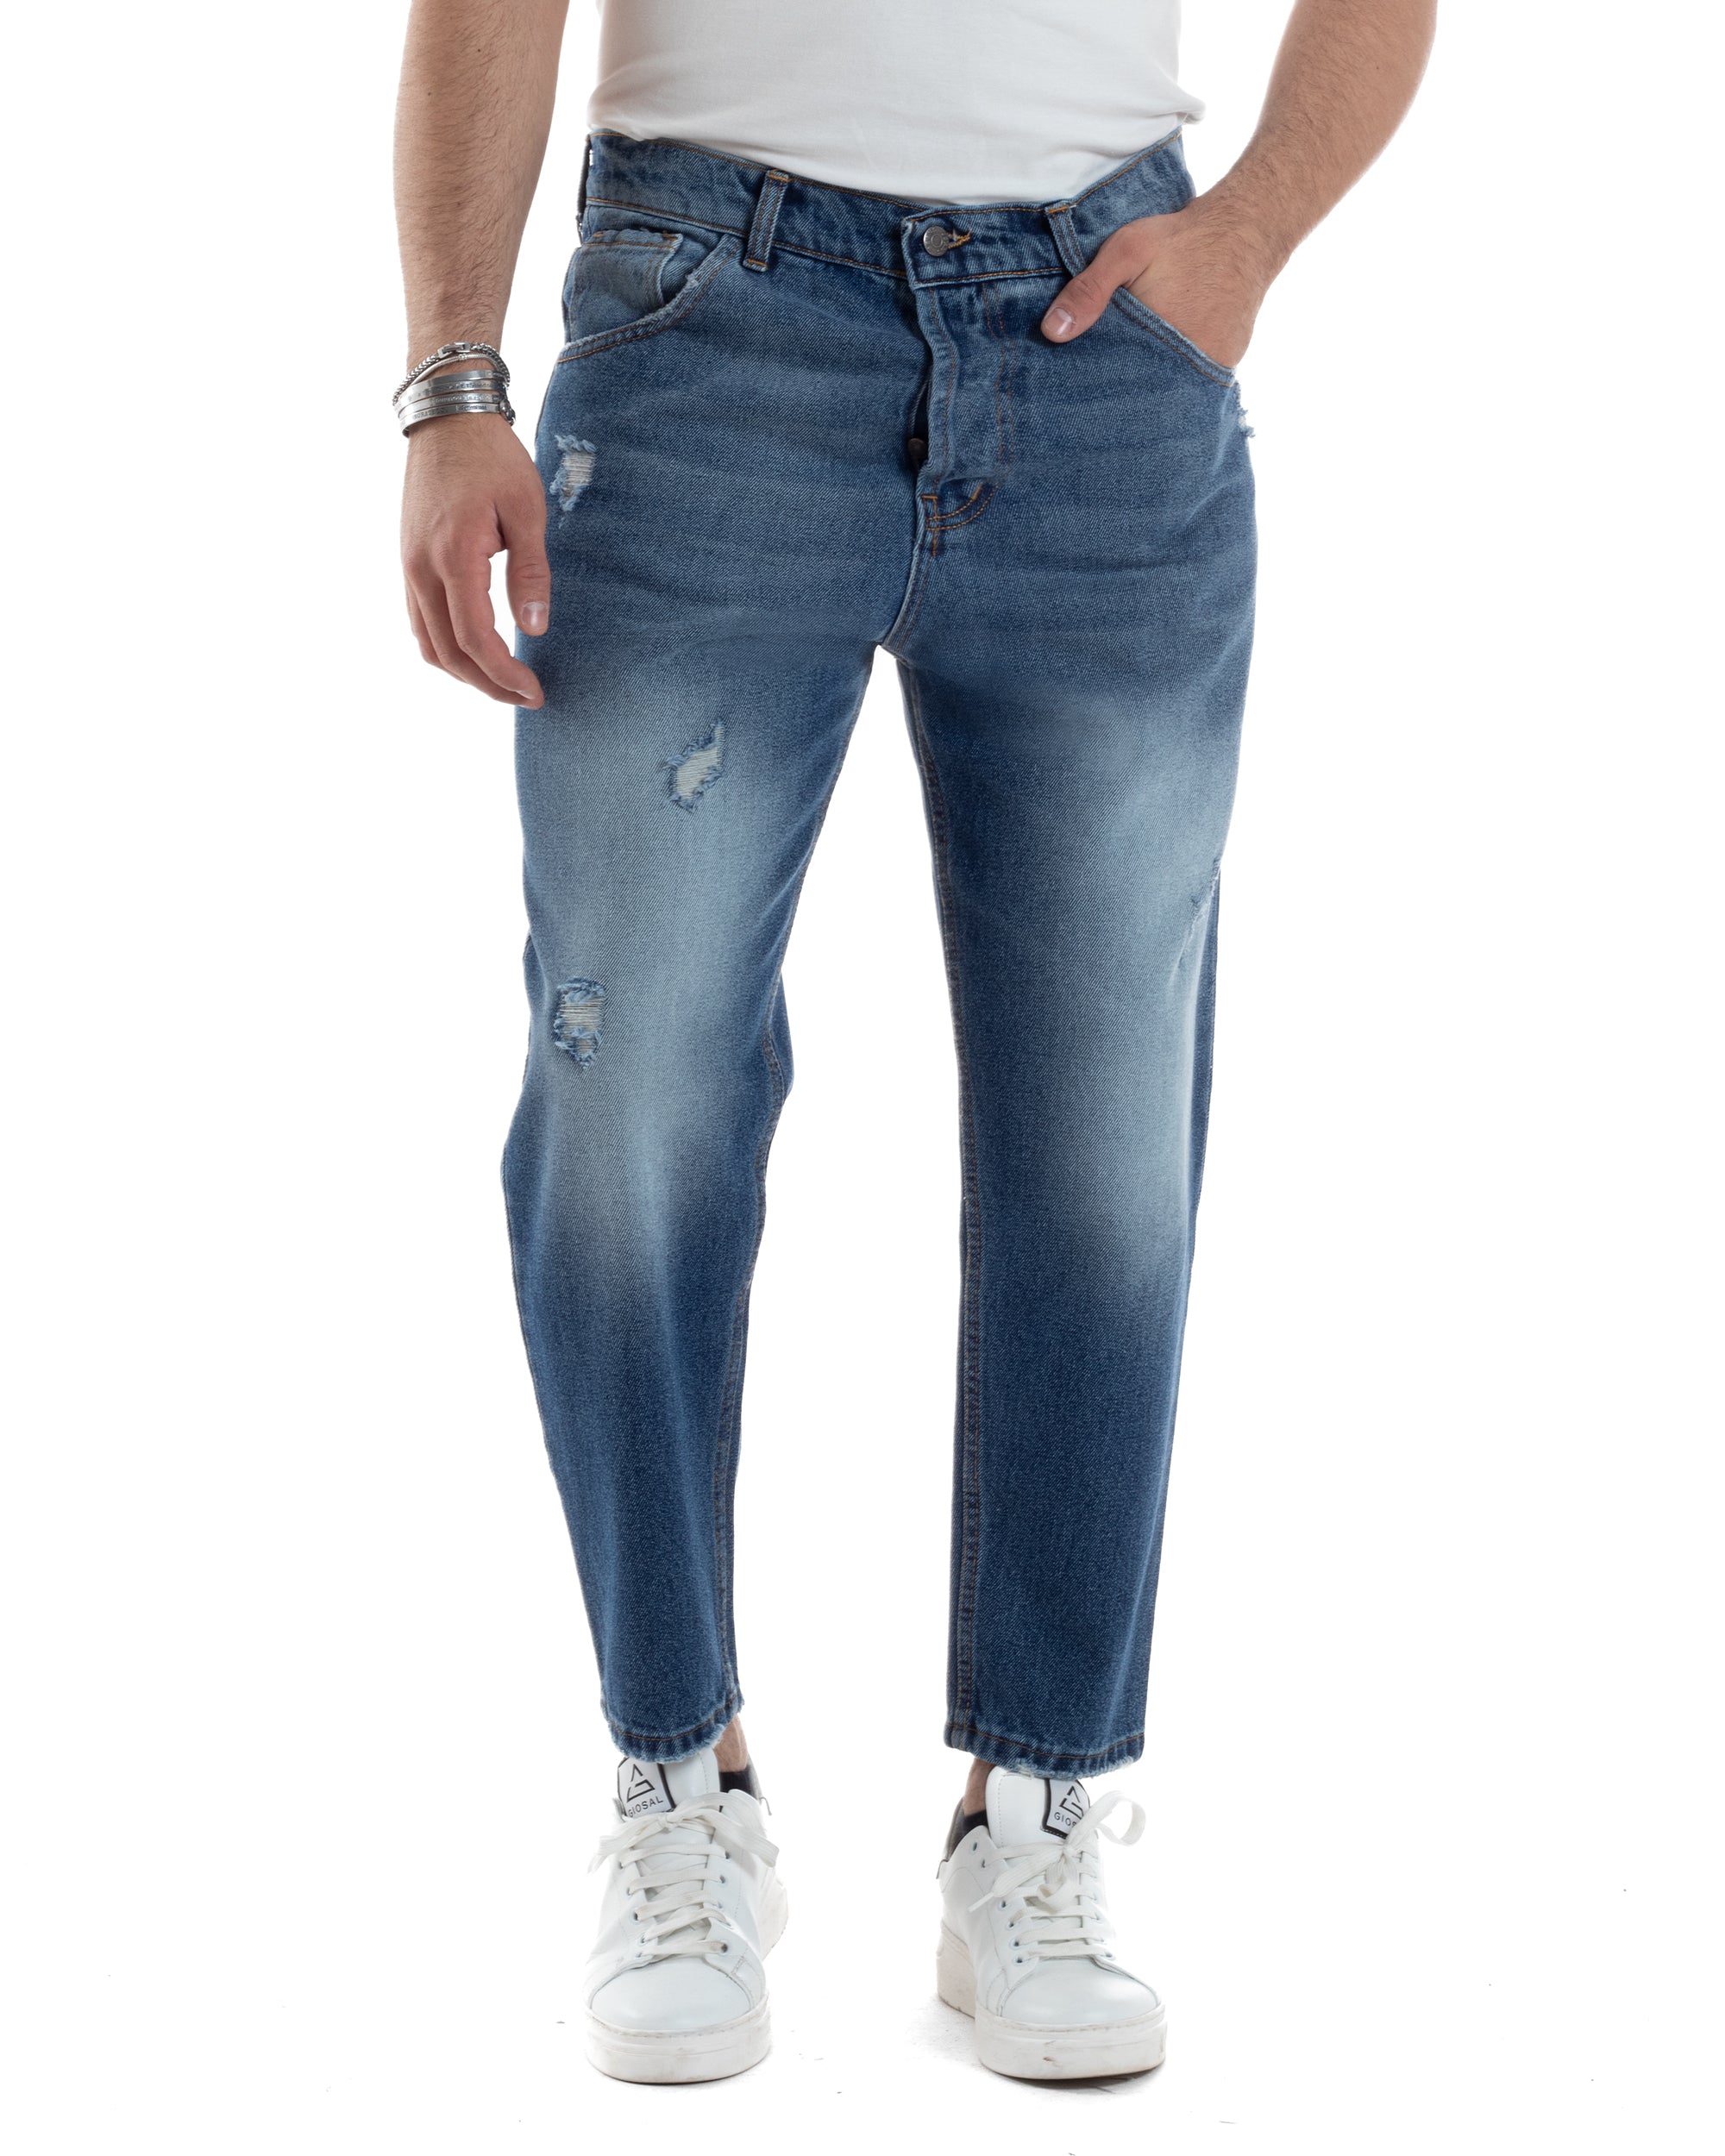 Men's Jeans Trousers Loose Fit Denim With Rips Five Pockets GIOSAL-P5587A